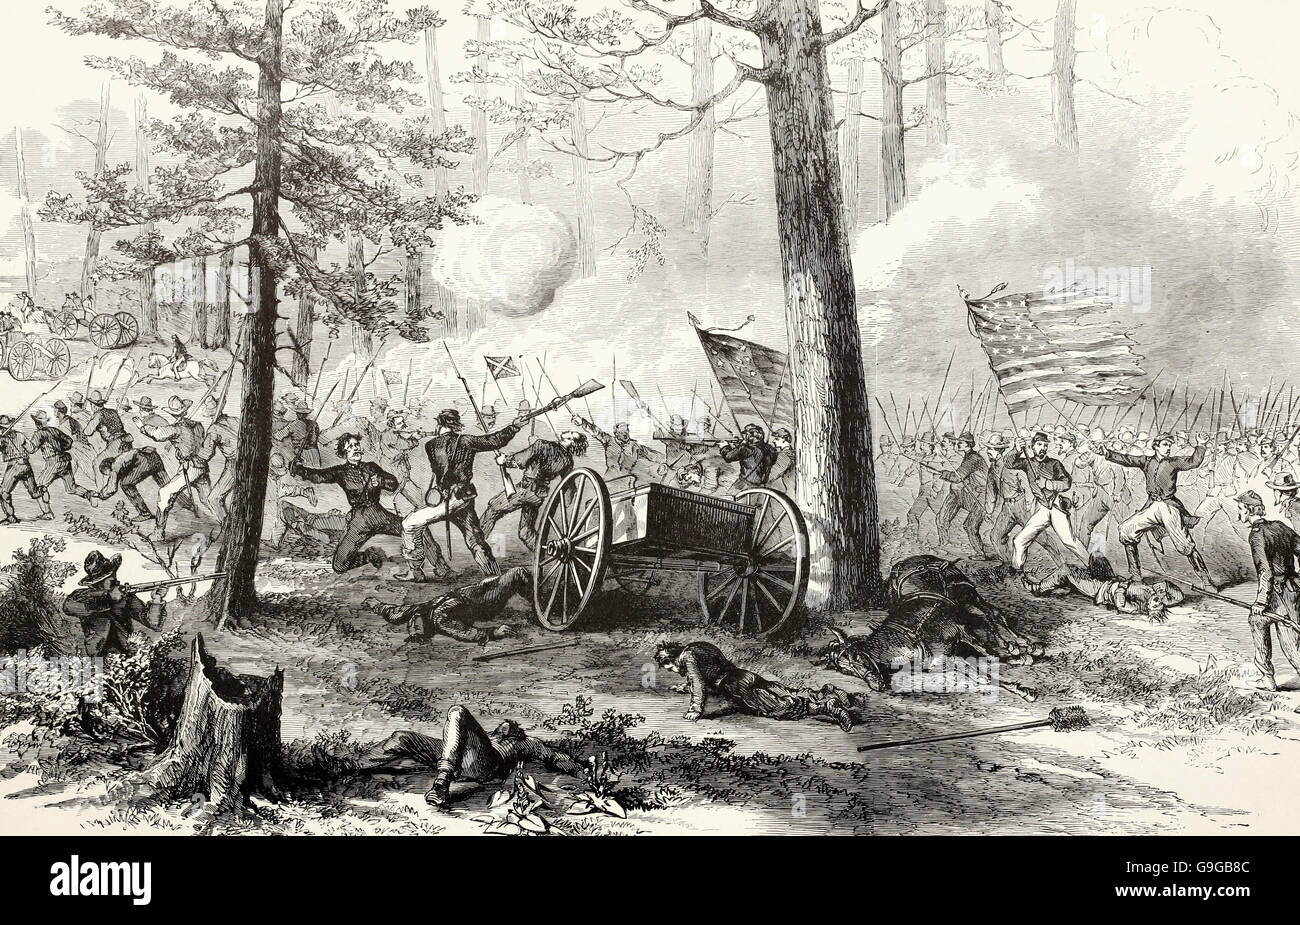 The Battle of Bentonville, NC - Major General Mower, commanding First Division, Seventeenth Corps, fleeing the Confederate Left, half a mile from Bentonville, March 20, 1865. USA Civil War Stock Photo